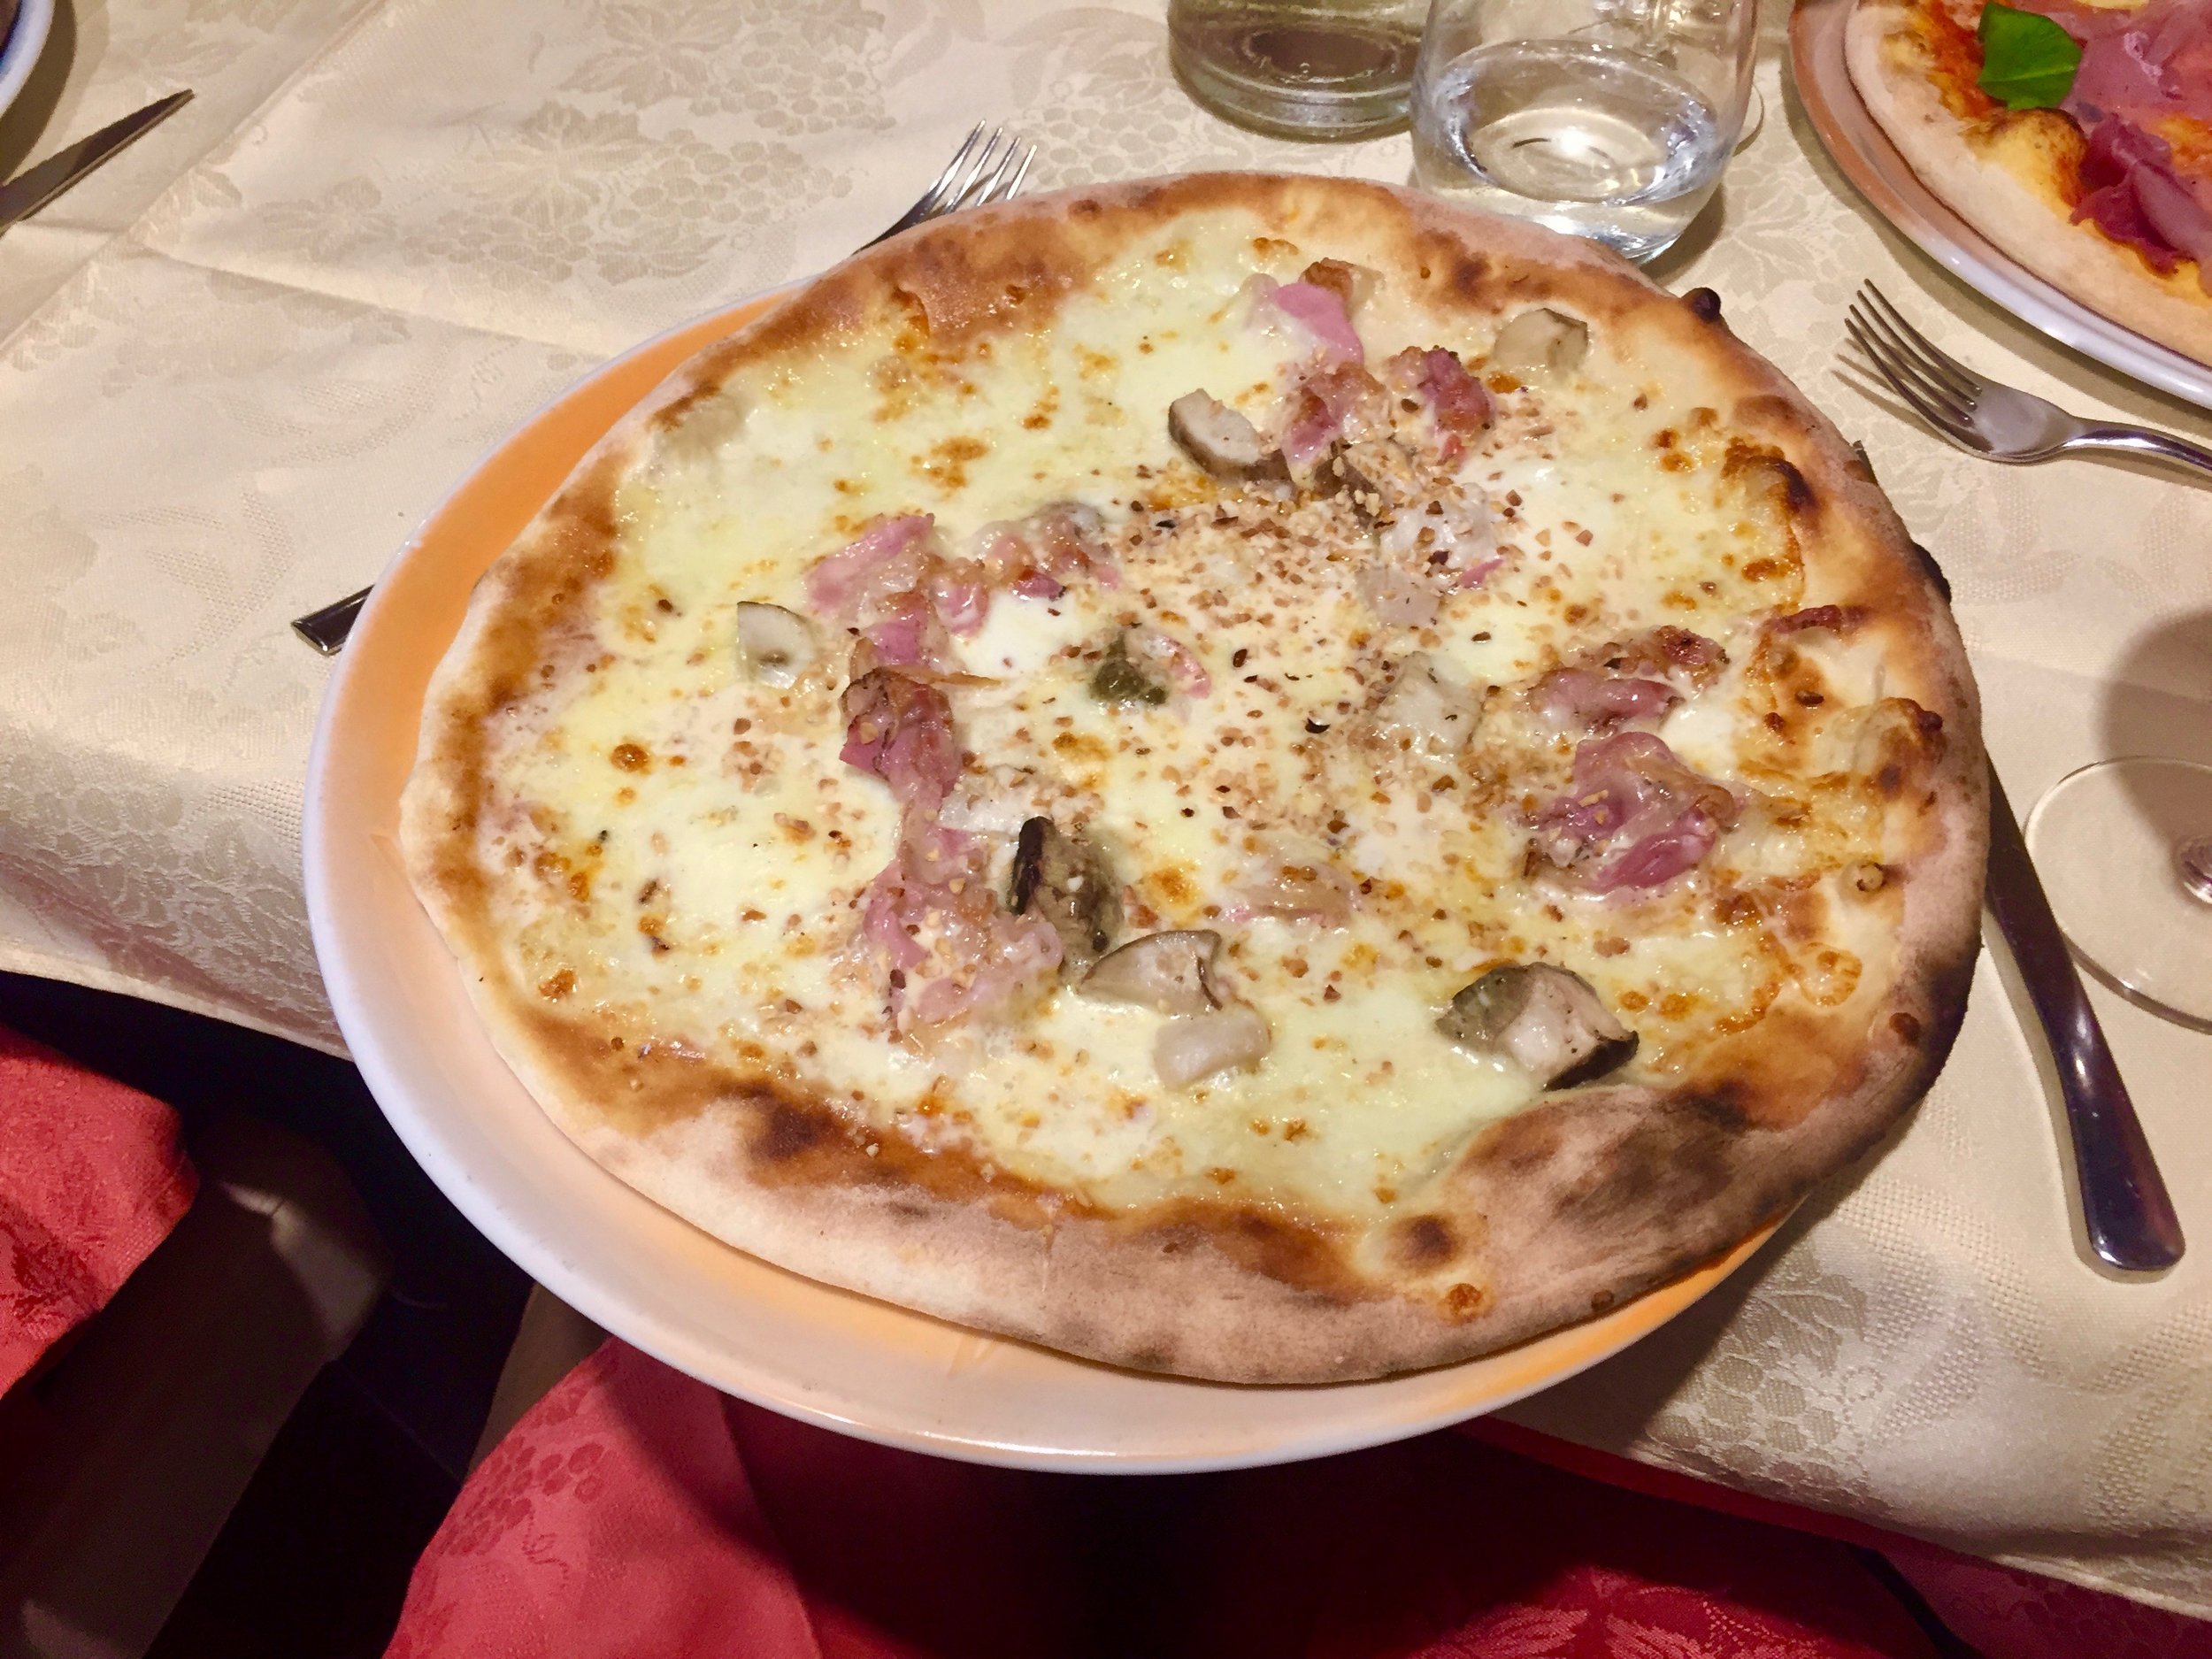 Some of the pizza at Cascina Manzo